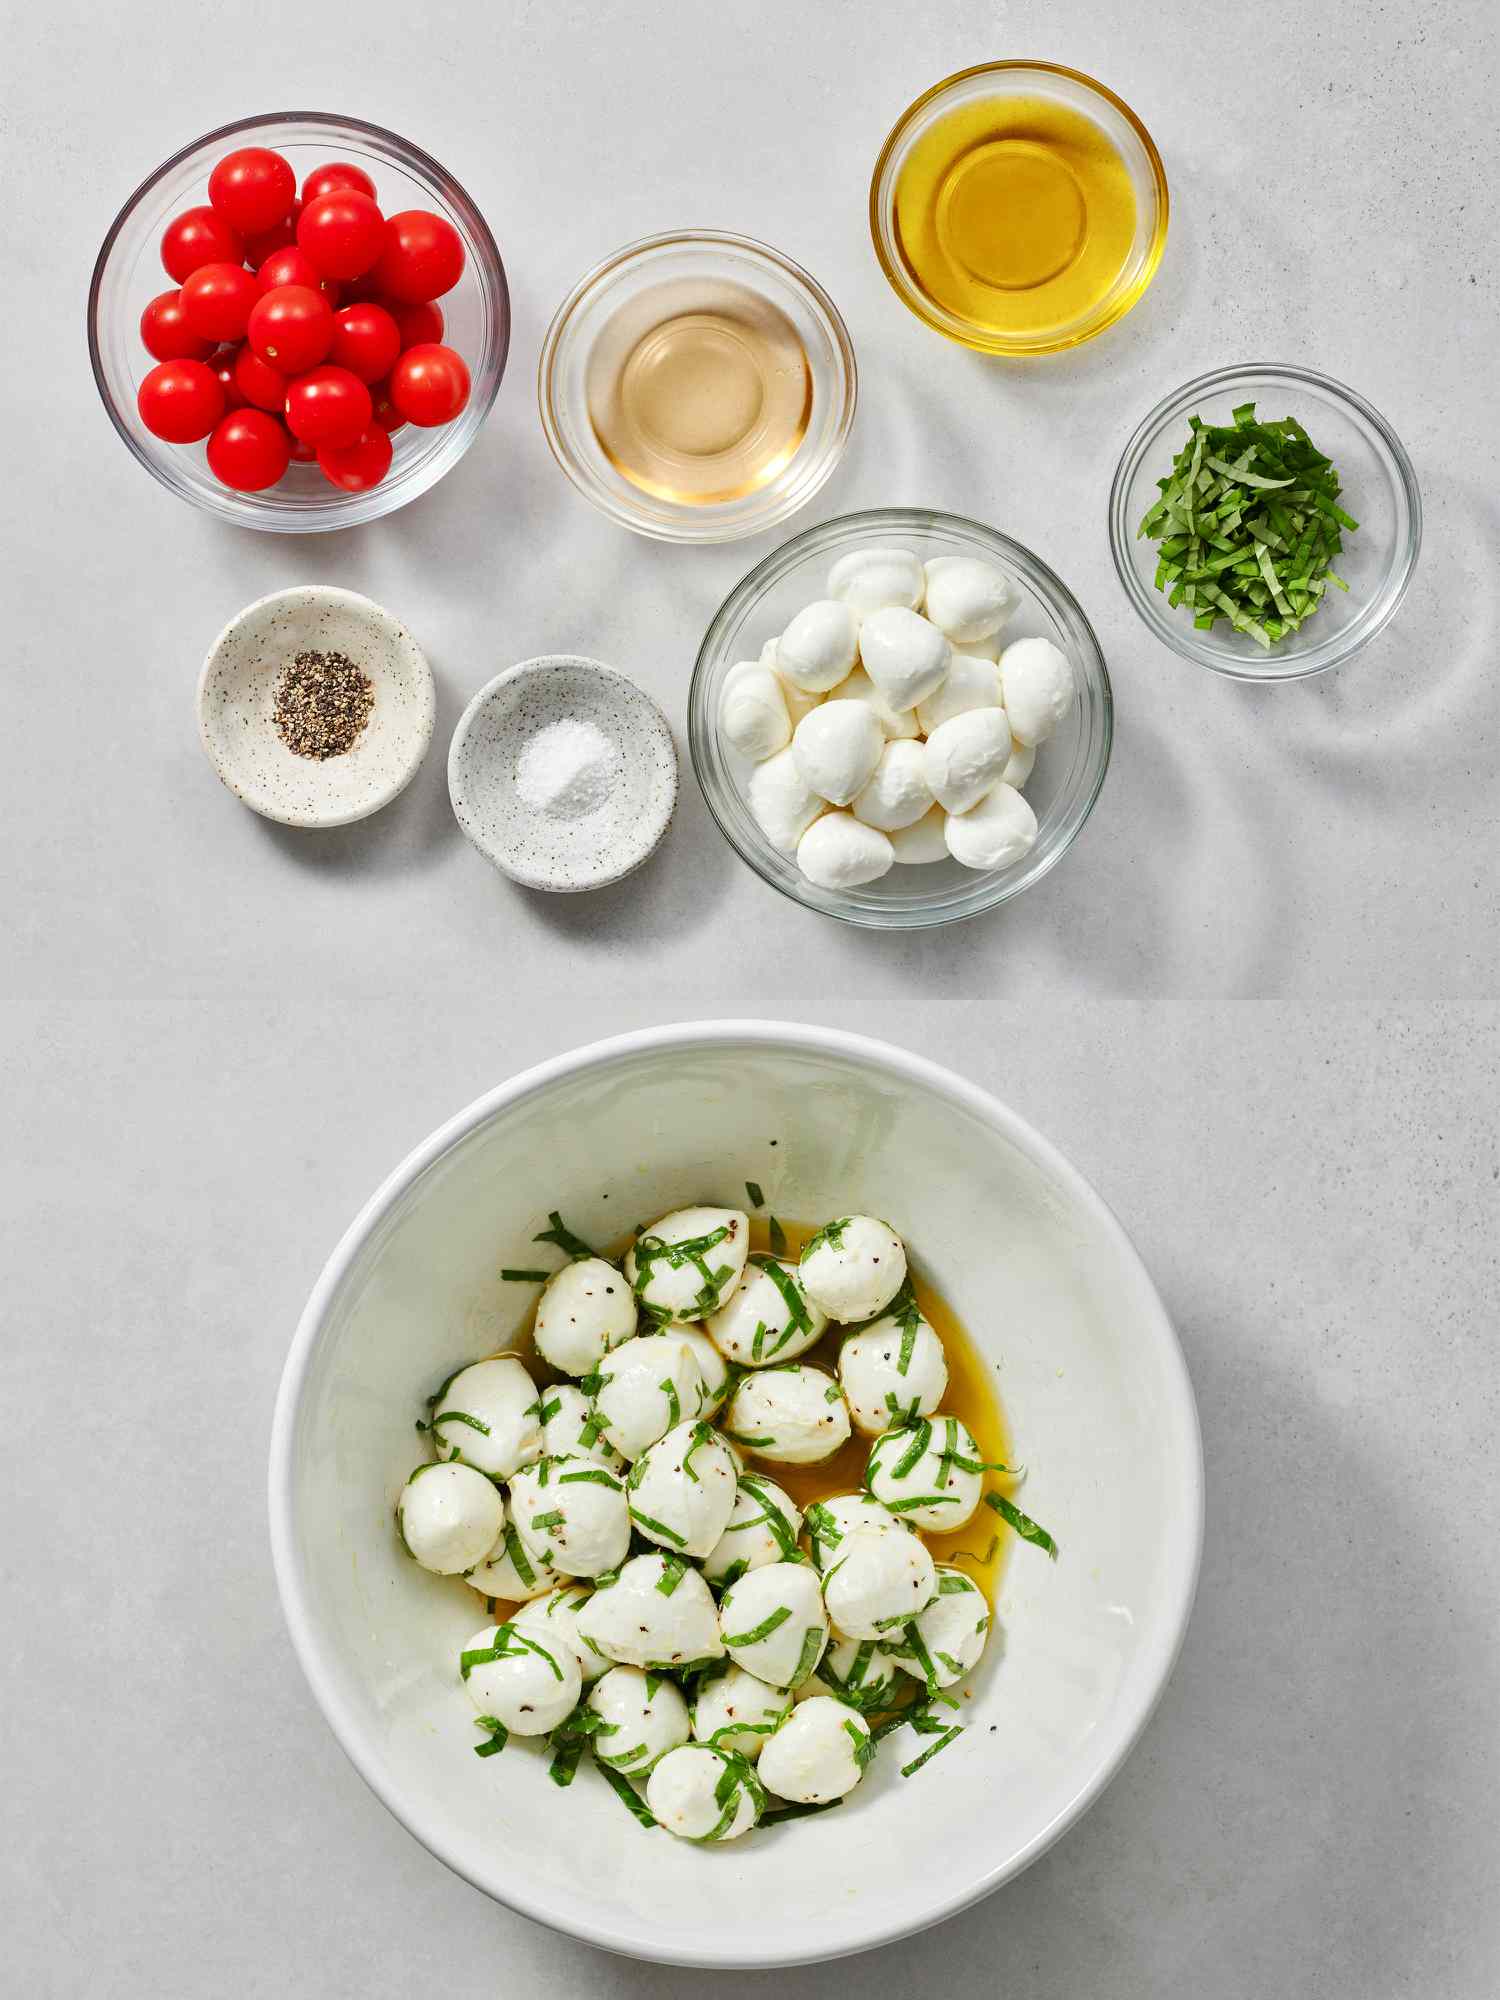 Mozzarella added to combined oil and basil inside bowl and seasoned with salt and pepper